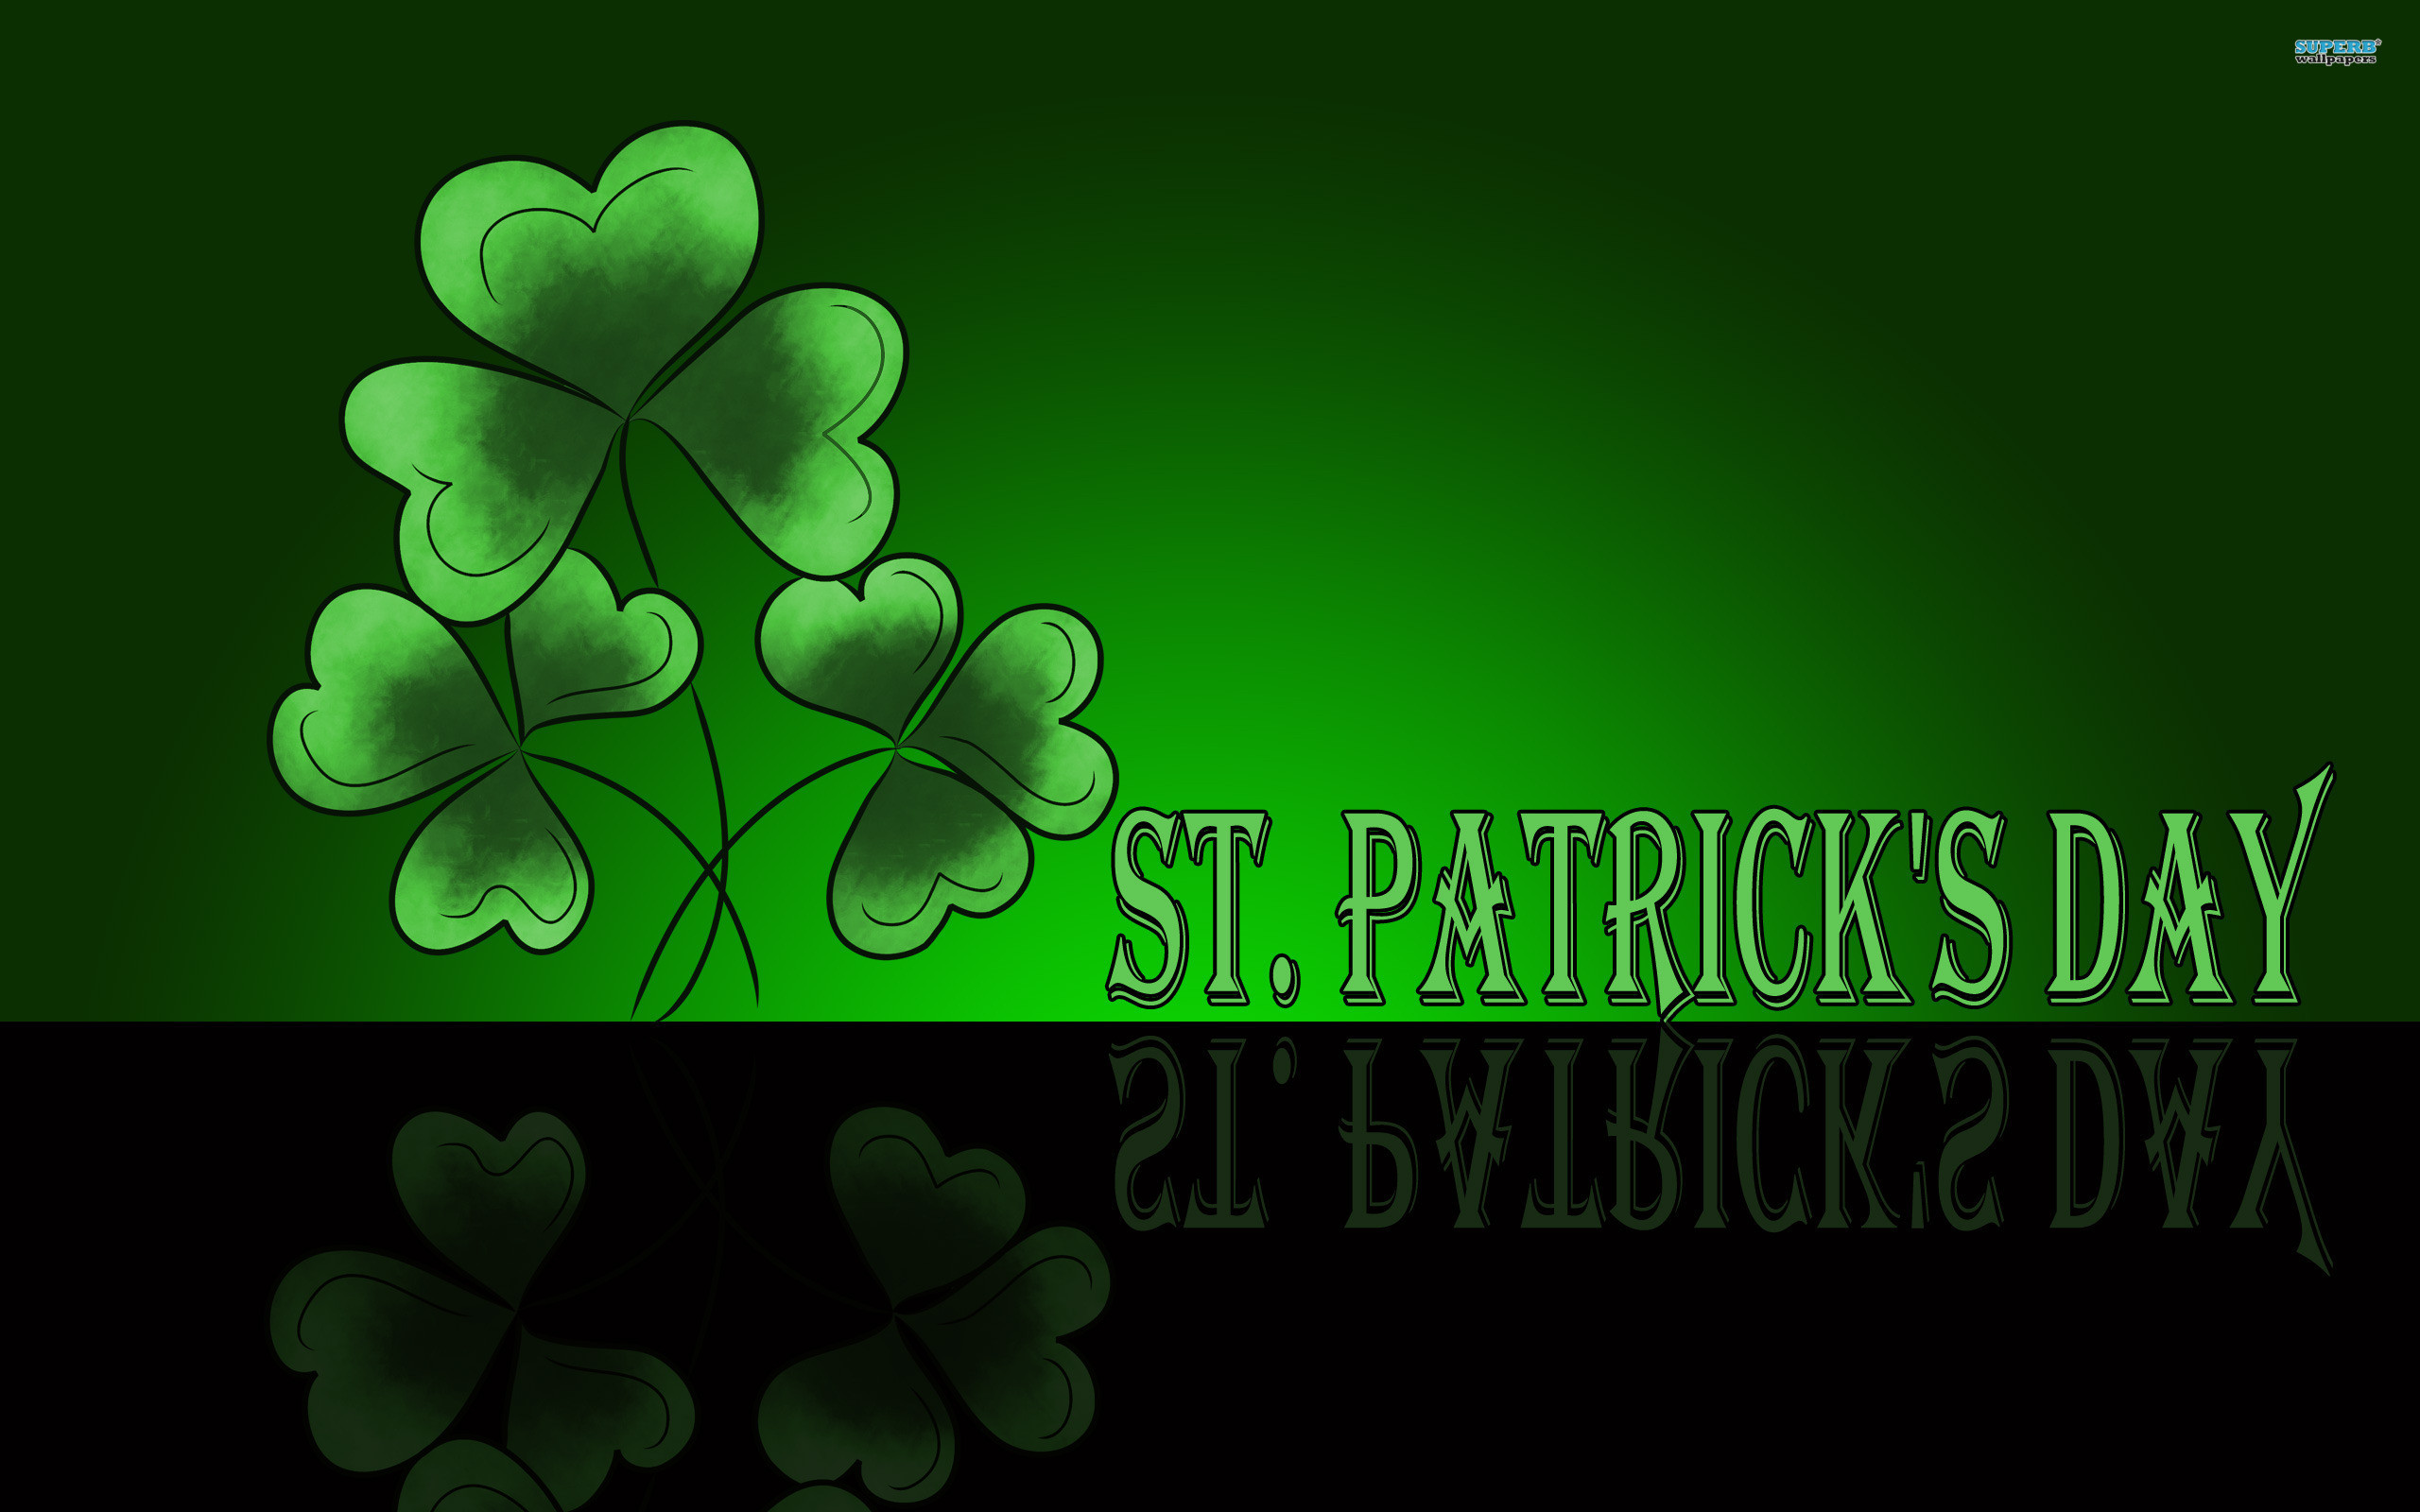 2560x1600 St Patrick's Day Wallpapers, Backgrounds for My PC, Desktop, Laptop, Mobile